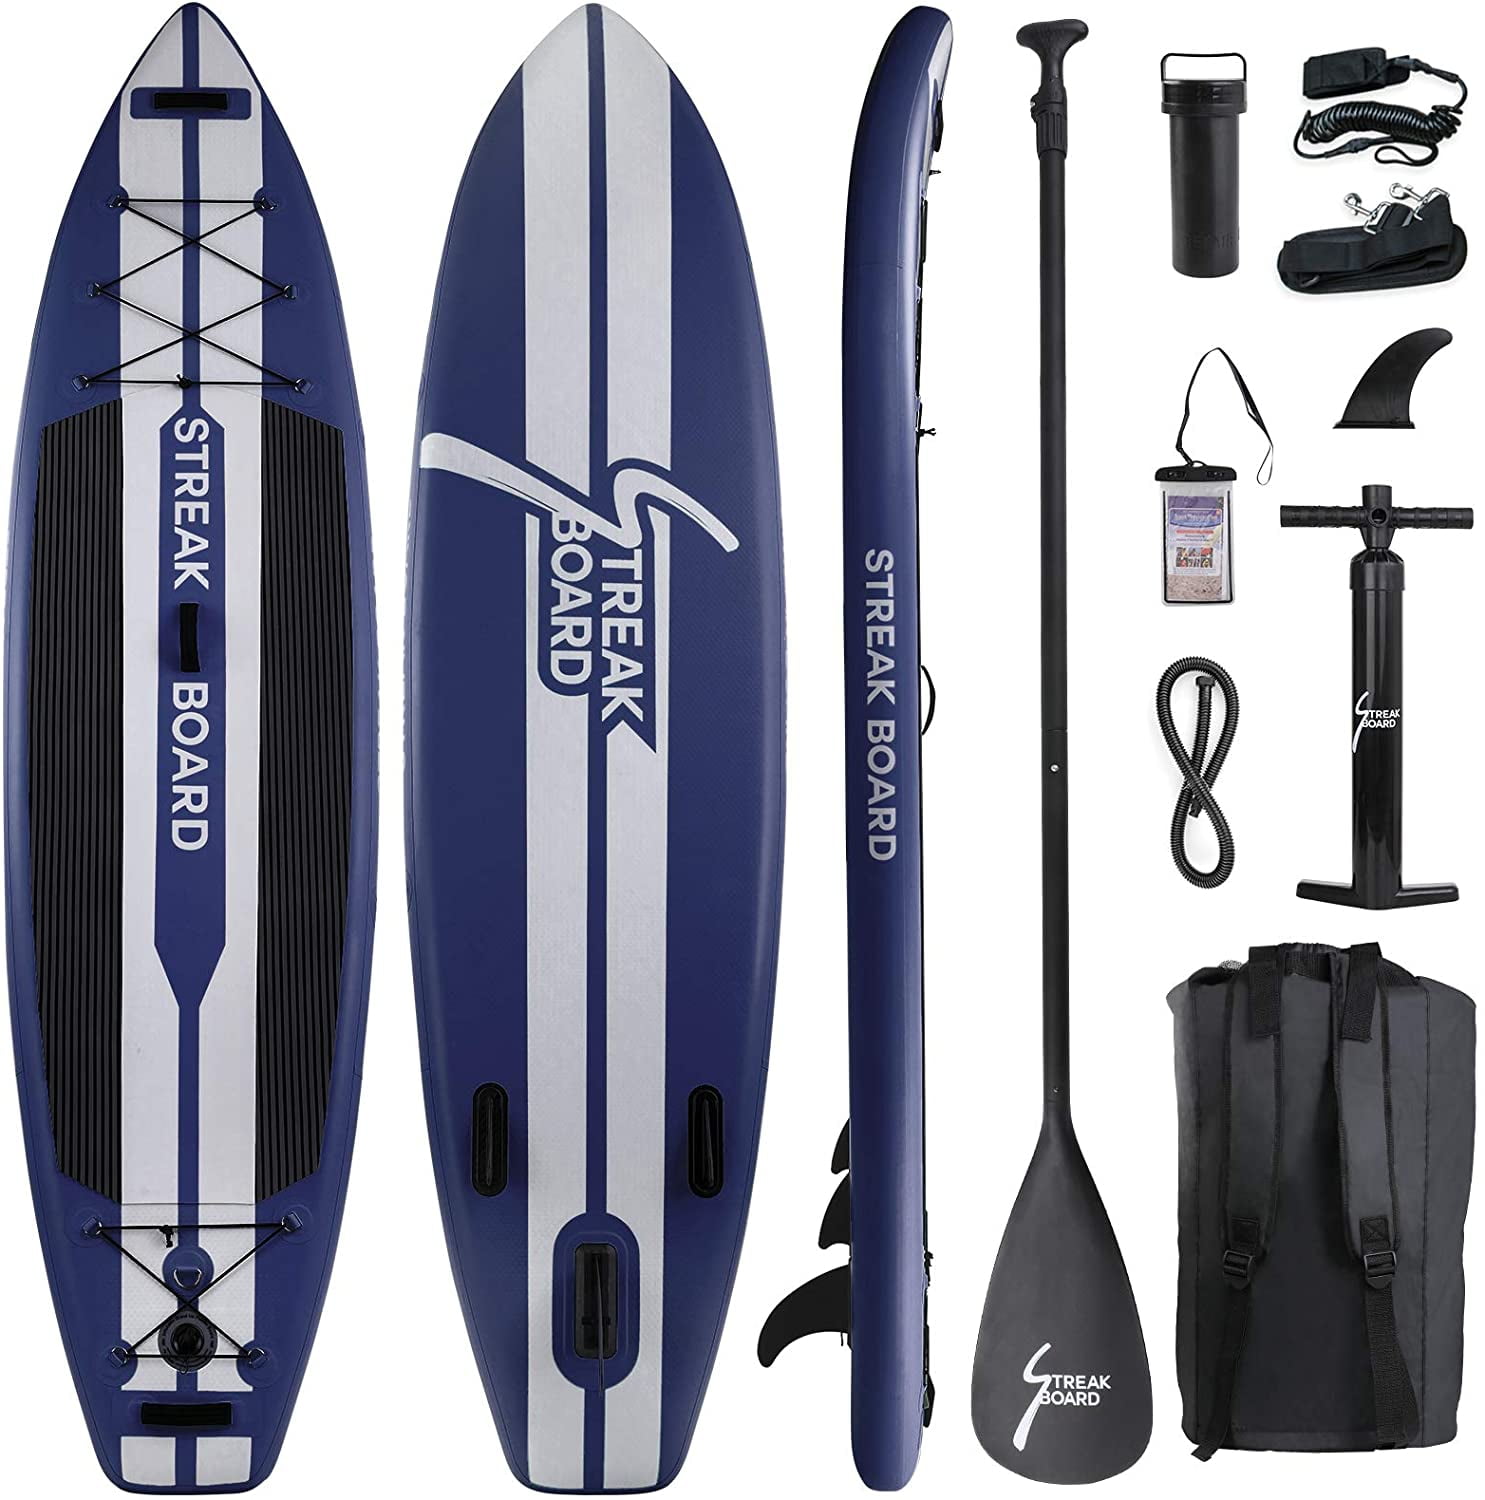 10' Inflatable Stand Up Paddle Board Surfing SUP Boards No Slip Deck 6'' Thick 